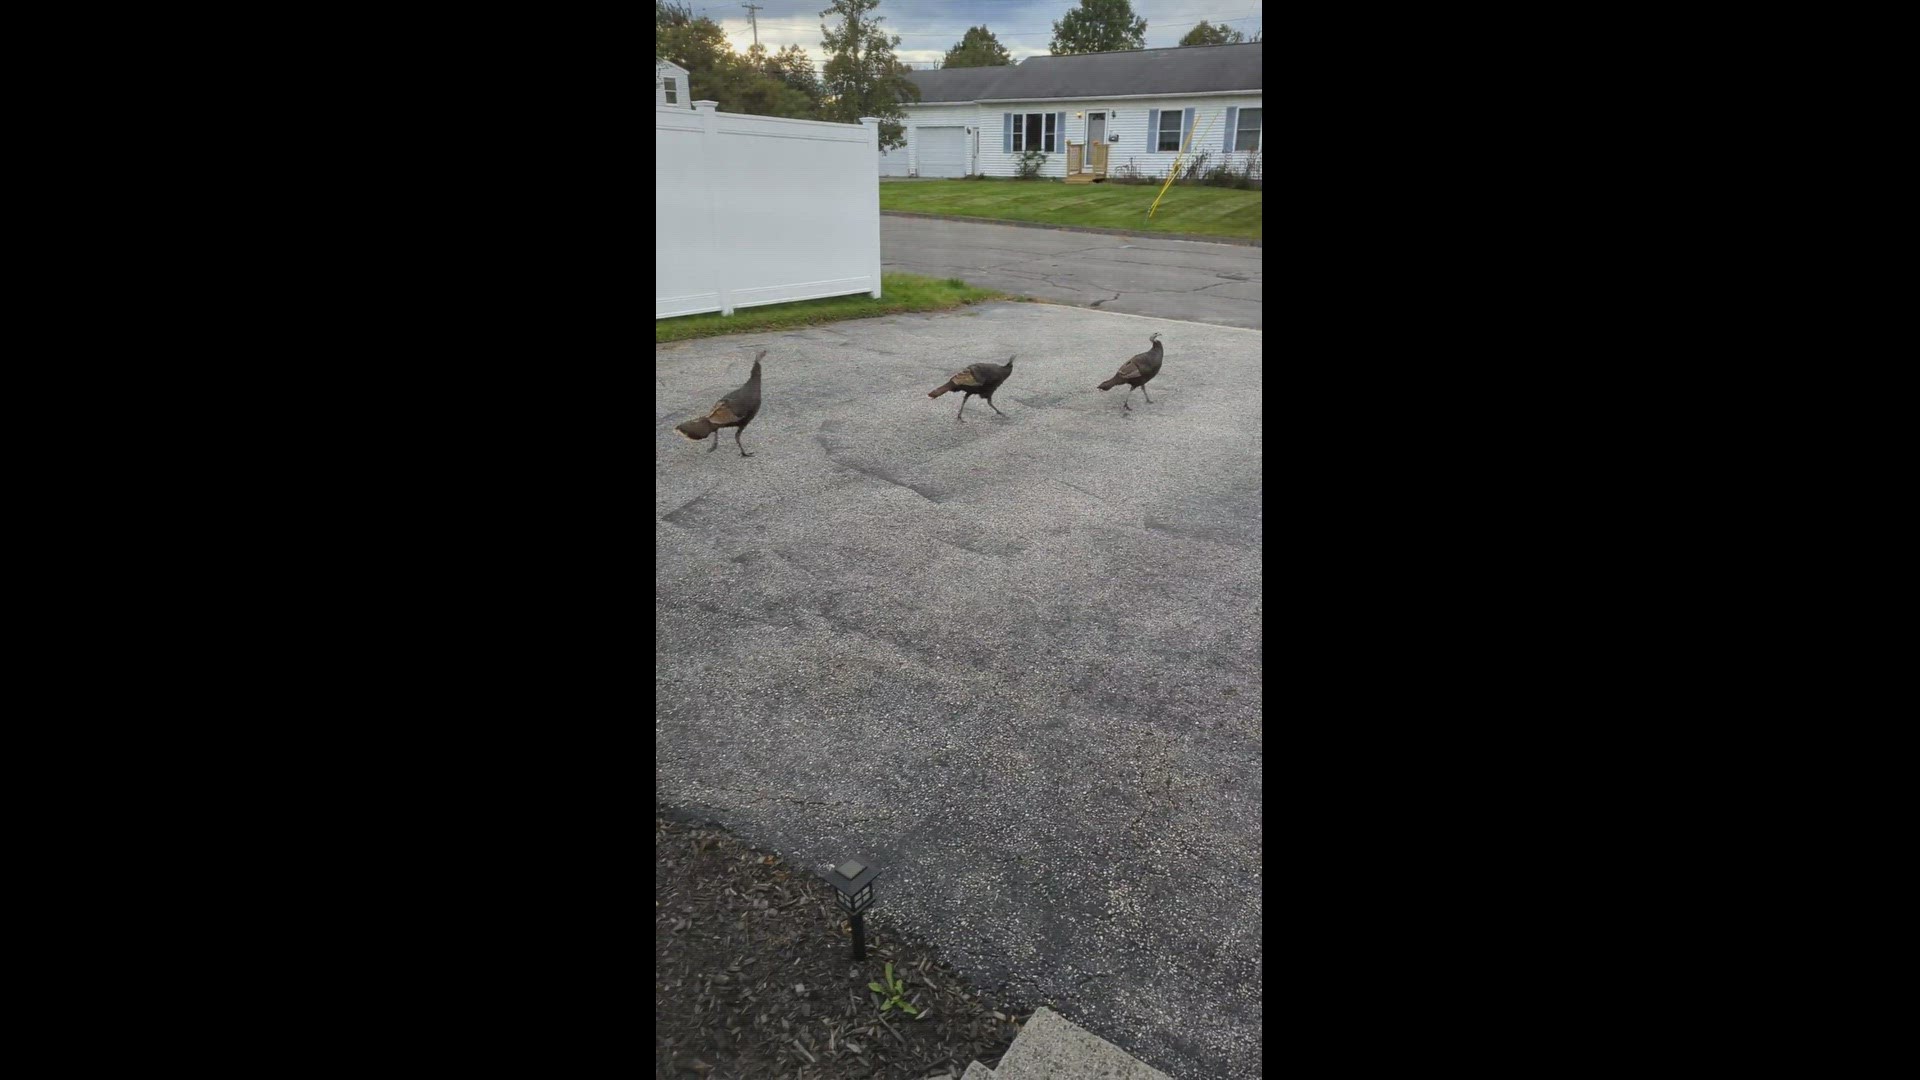 We have watched these turkeys grow up in our neighborhood and love to see them on their daily visits.
Credit: Erica Brown